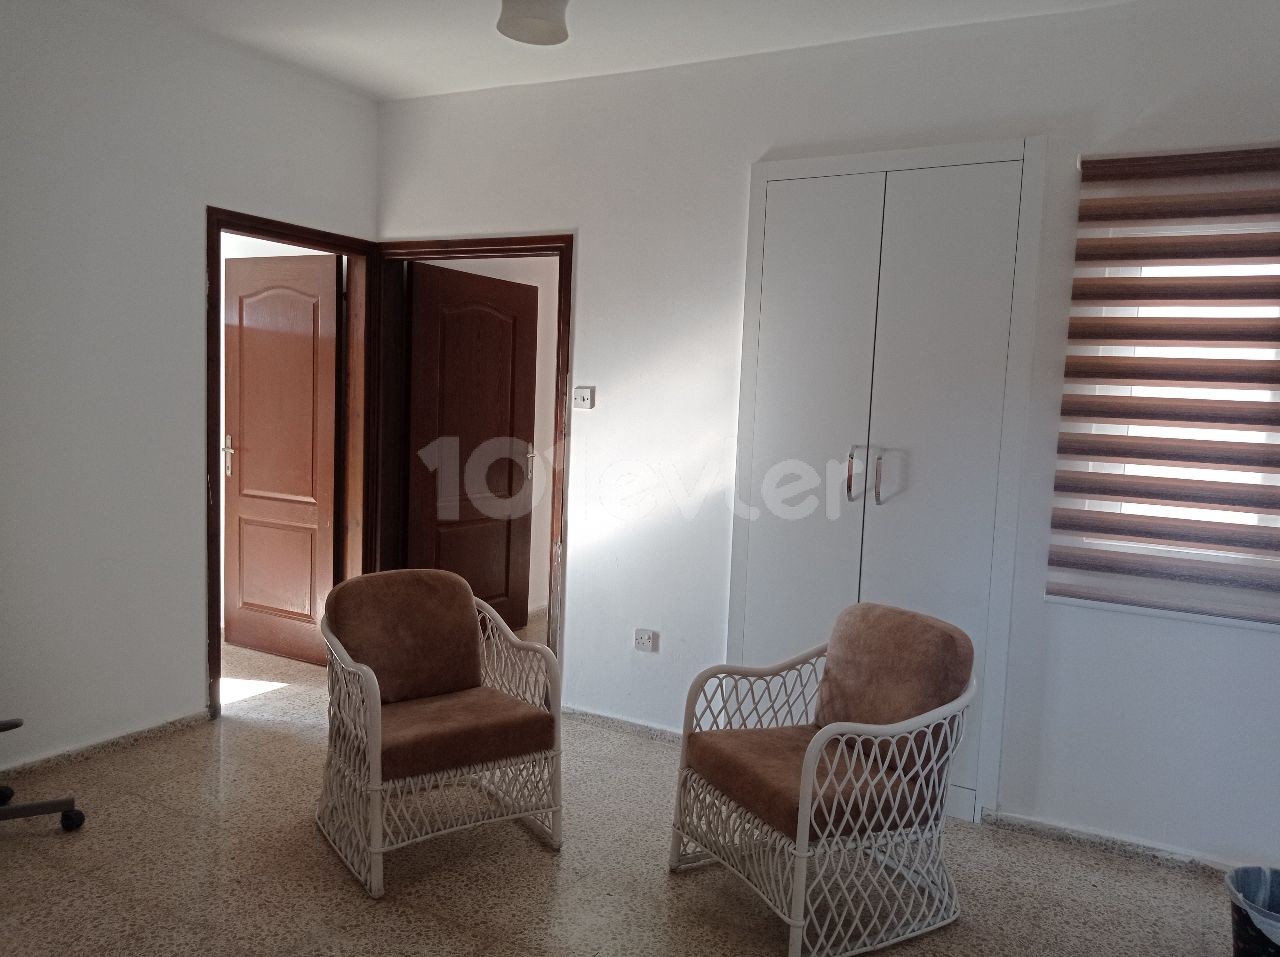 3 + 1 apartments for rent in the central location in the Yenikent district. ** 